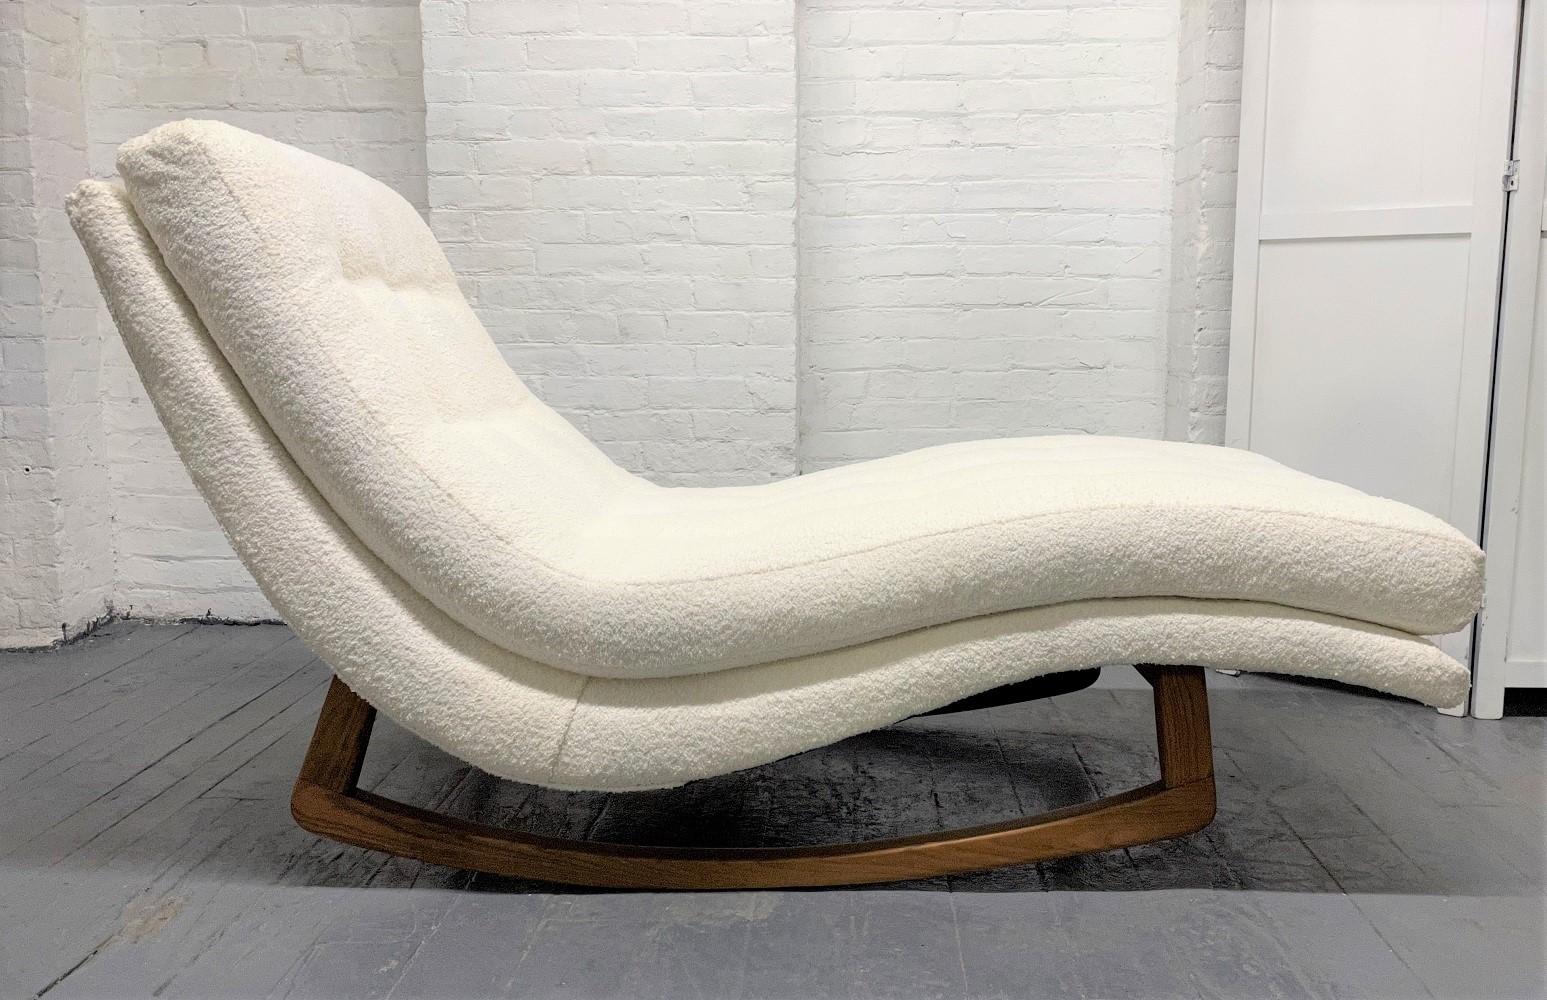 Adrian Pearsall Double Rocker for Craft Associates. The chaise is tufted and done in Bouclé with a solid wood base. Mid Century Modern.